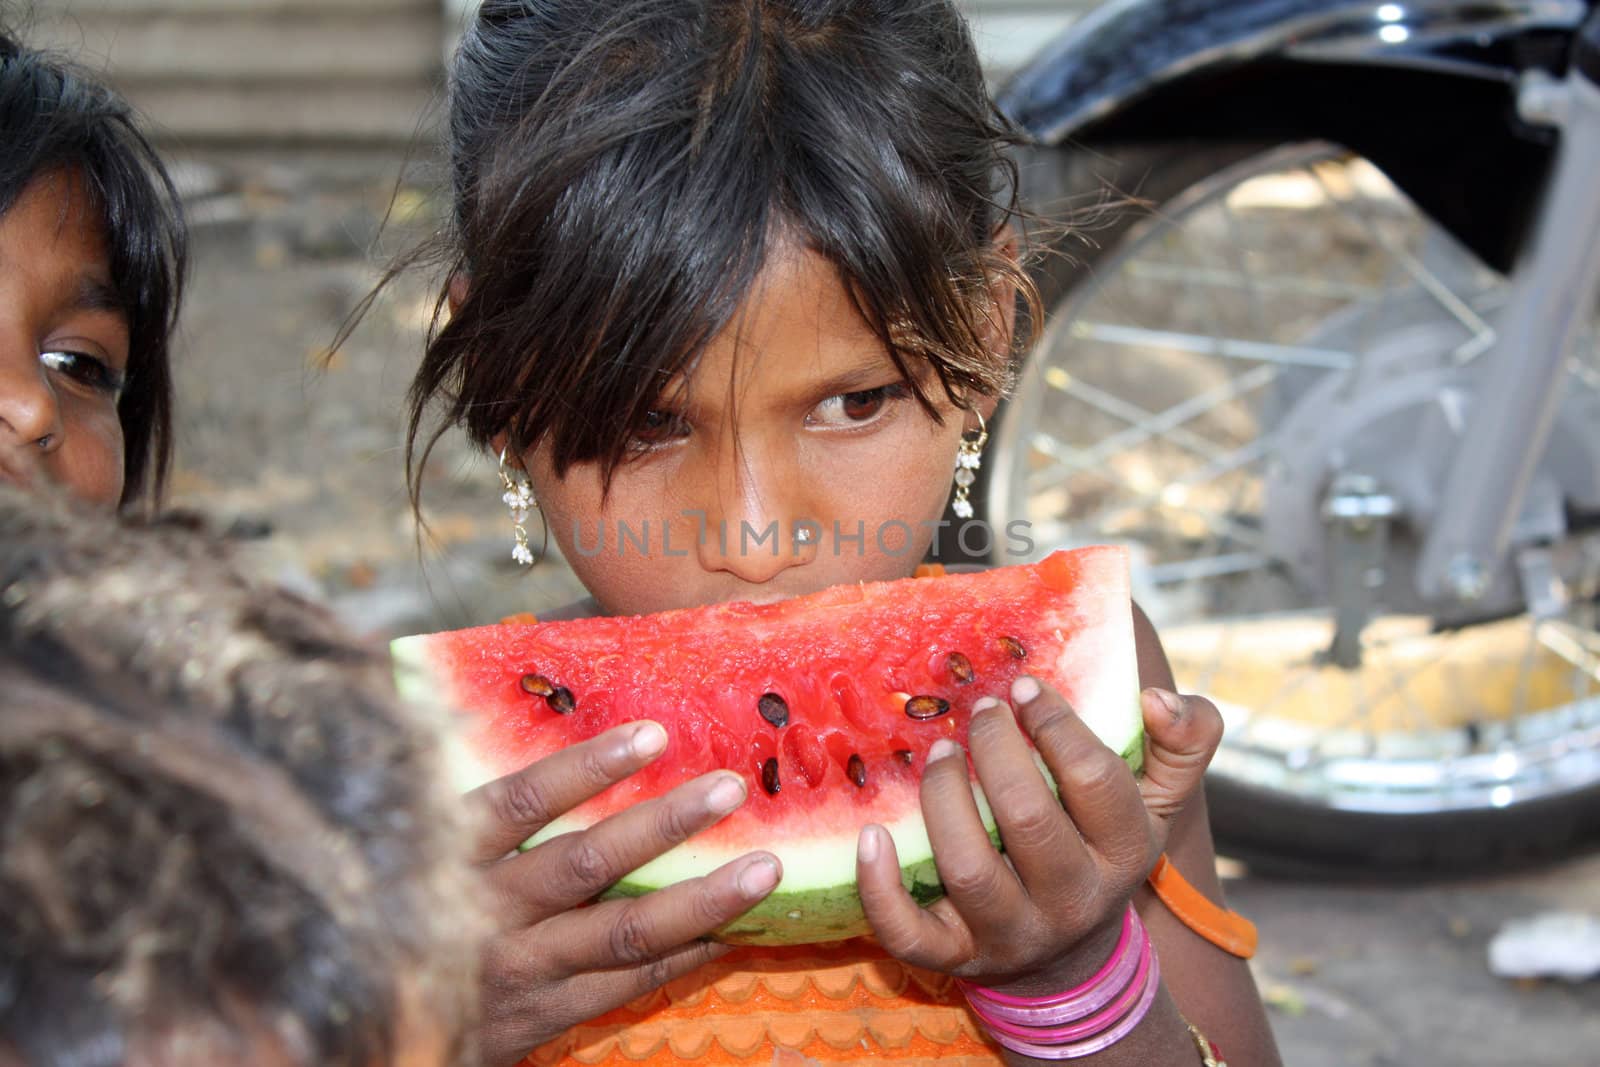 A hungry street-side Indian girl eating a watermelon.